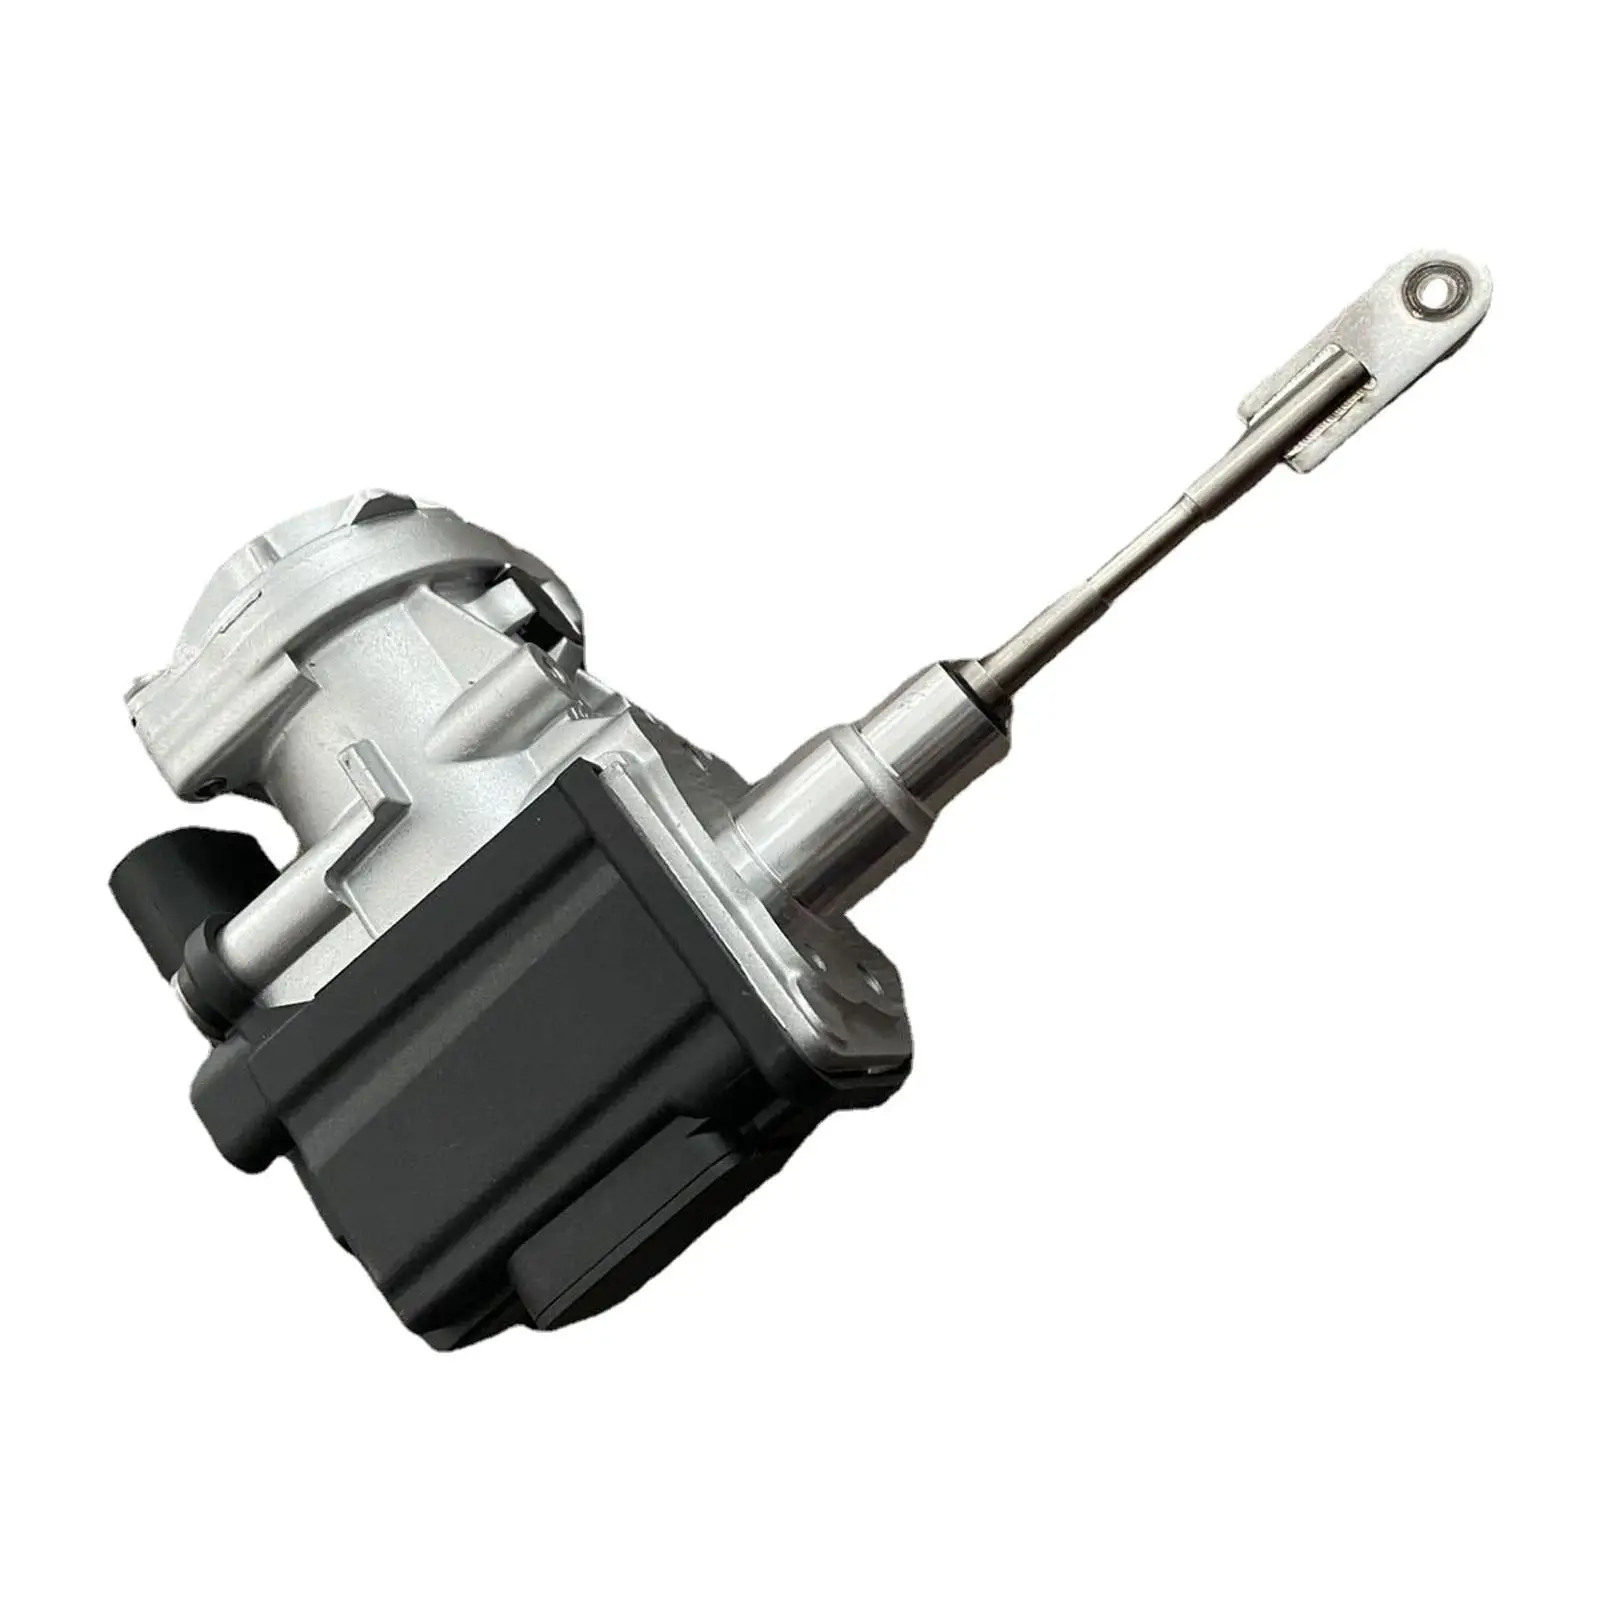 Turbo Actuator Replaces Easy to Use Spare Parts 04E14525Ab for Golf